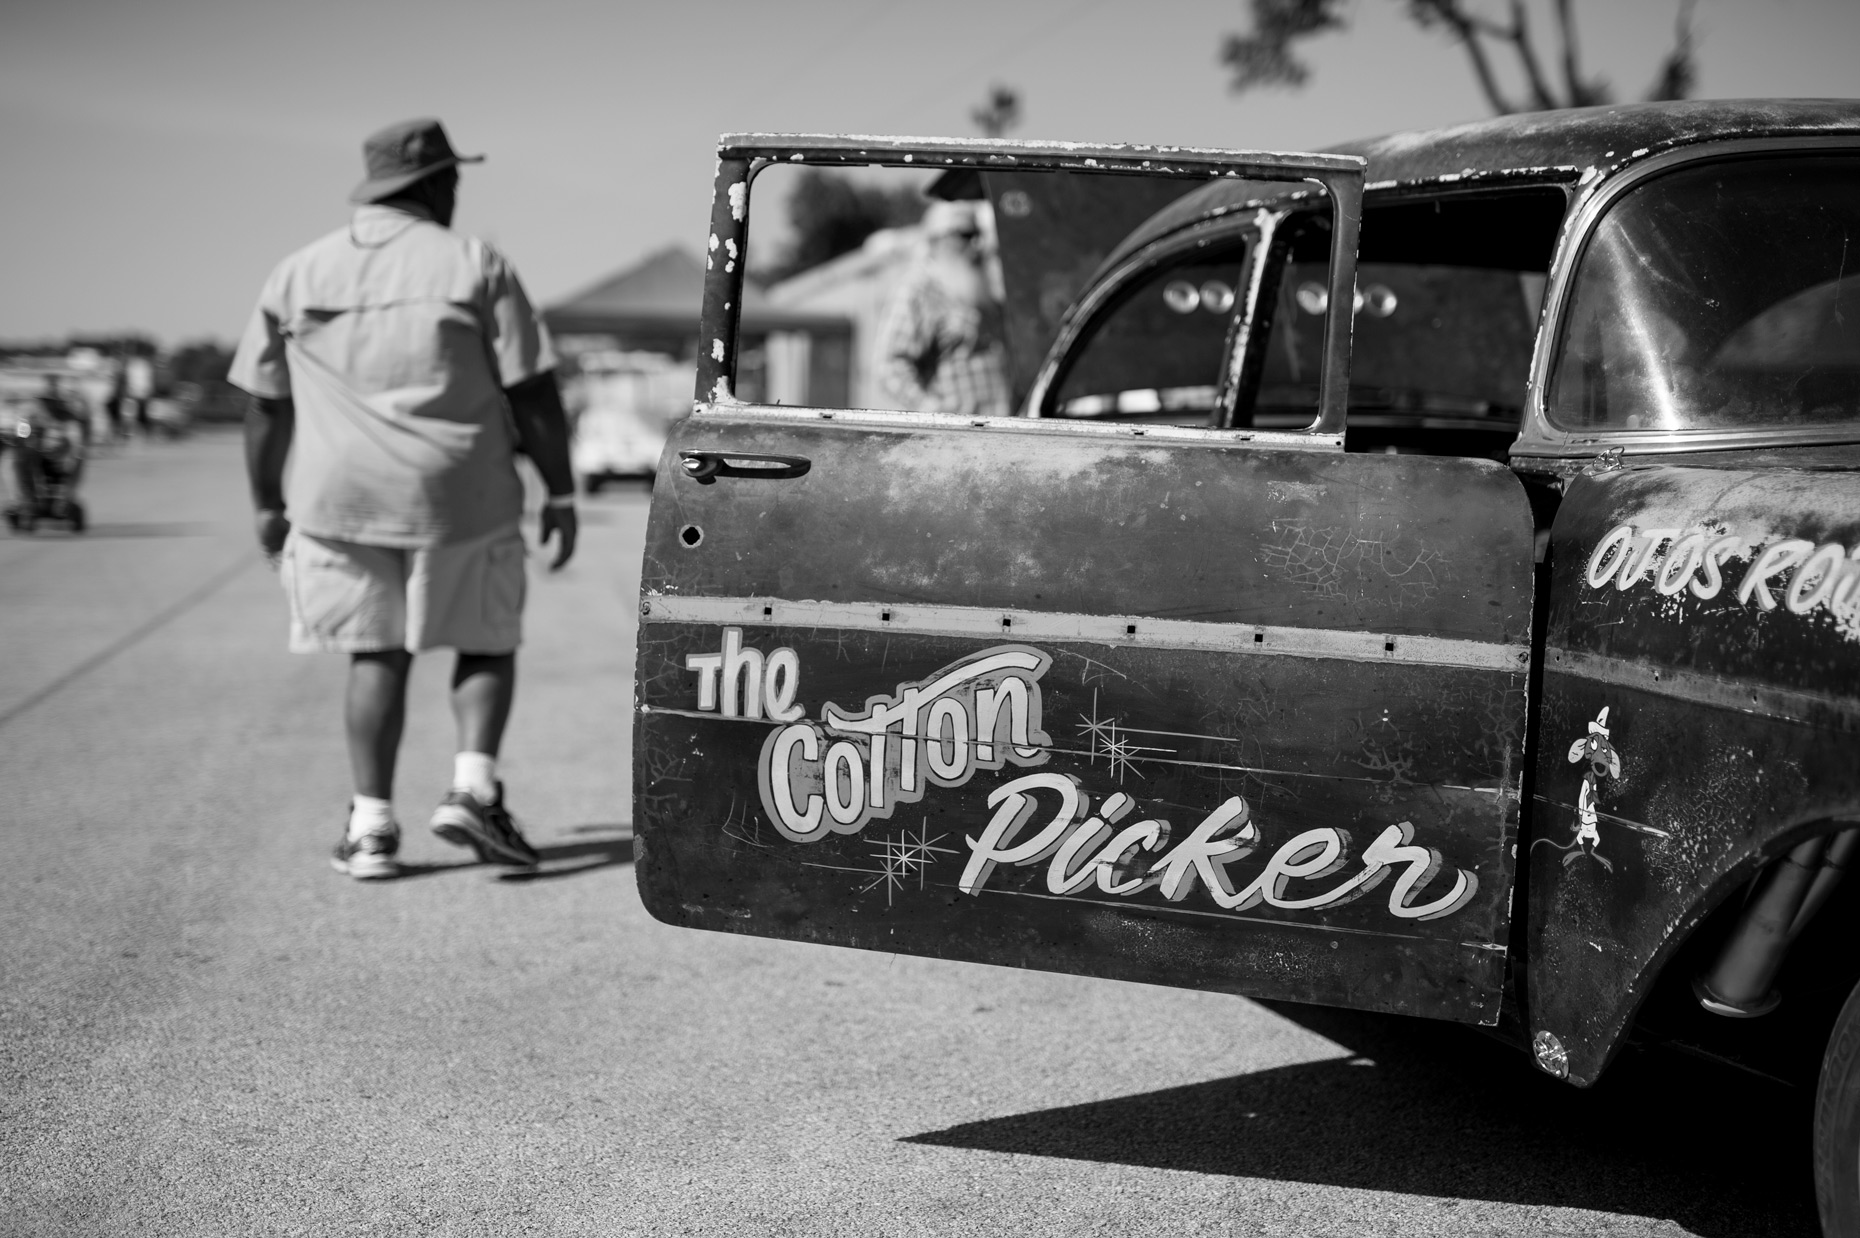 Day of the Drags by editorial photographer Kevin Brown